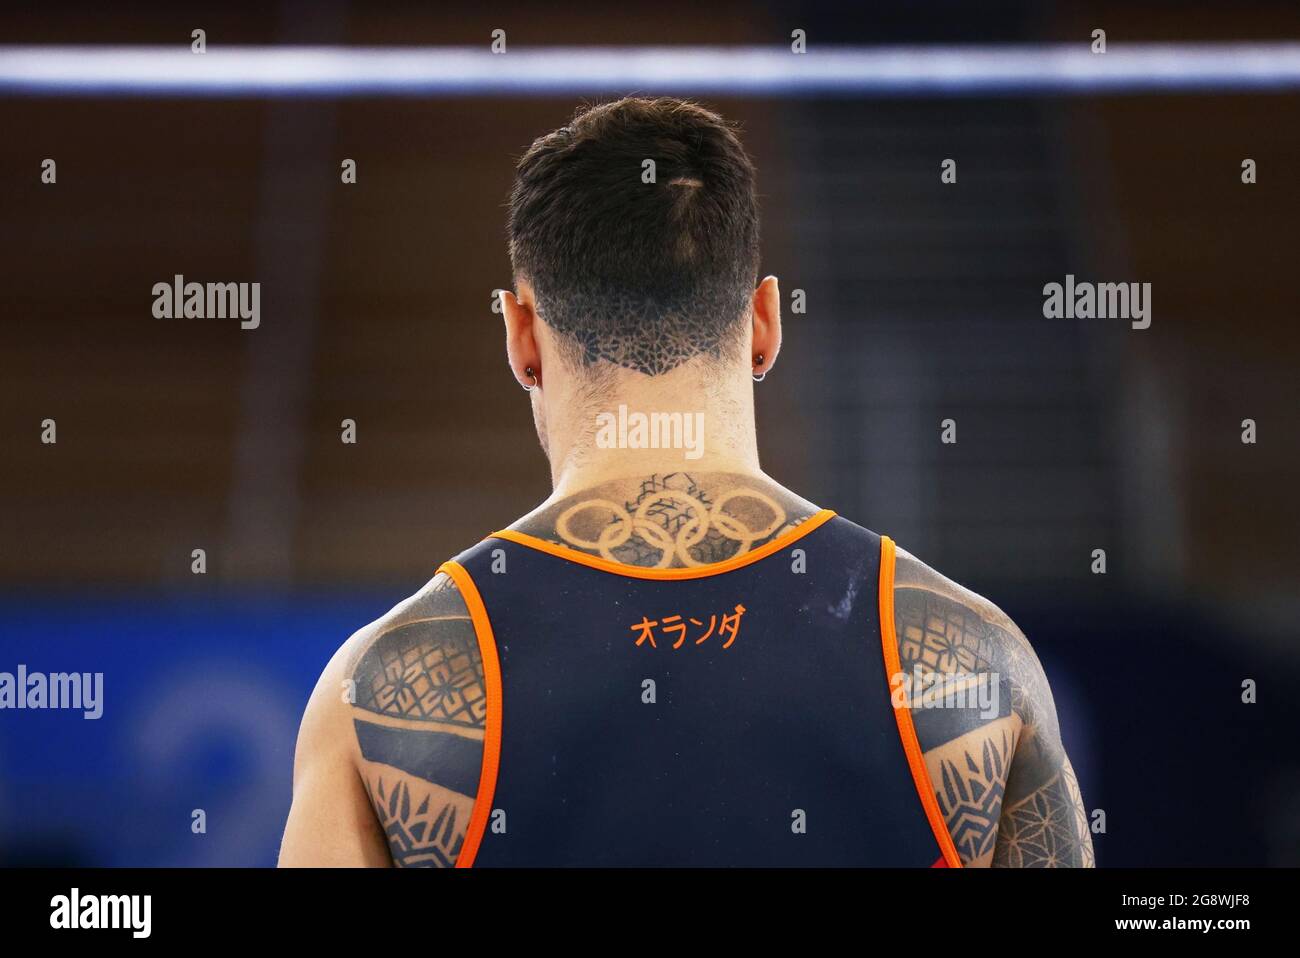 A Photo Taken On July 21 21 Shows A Gymnast With Tattoo Including Olympic Rings On His Back During Official Practice For Tokyo Olympic Men S Artistic Gymnastics At Ariake Gymnastics Centre Kyodo Kyodo